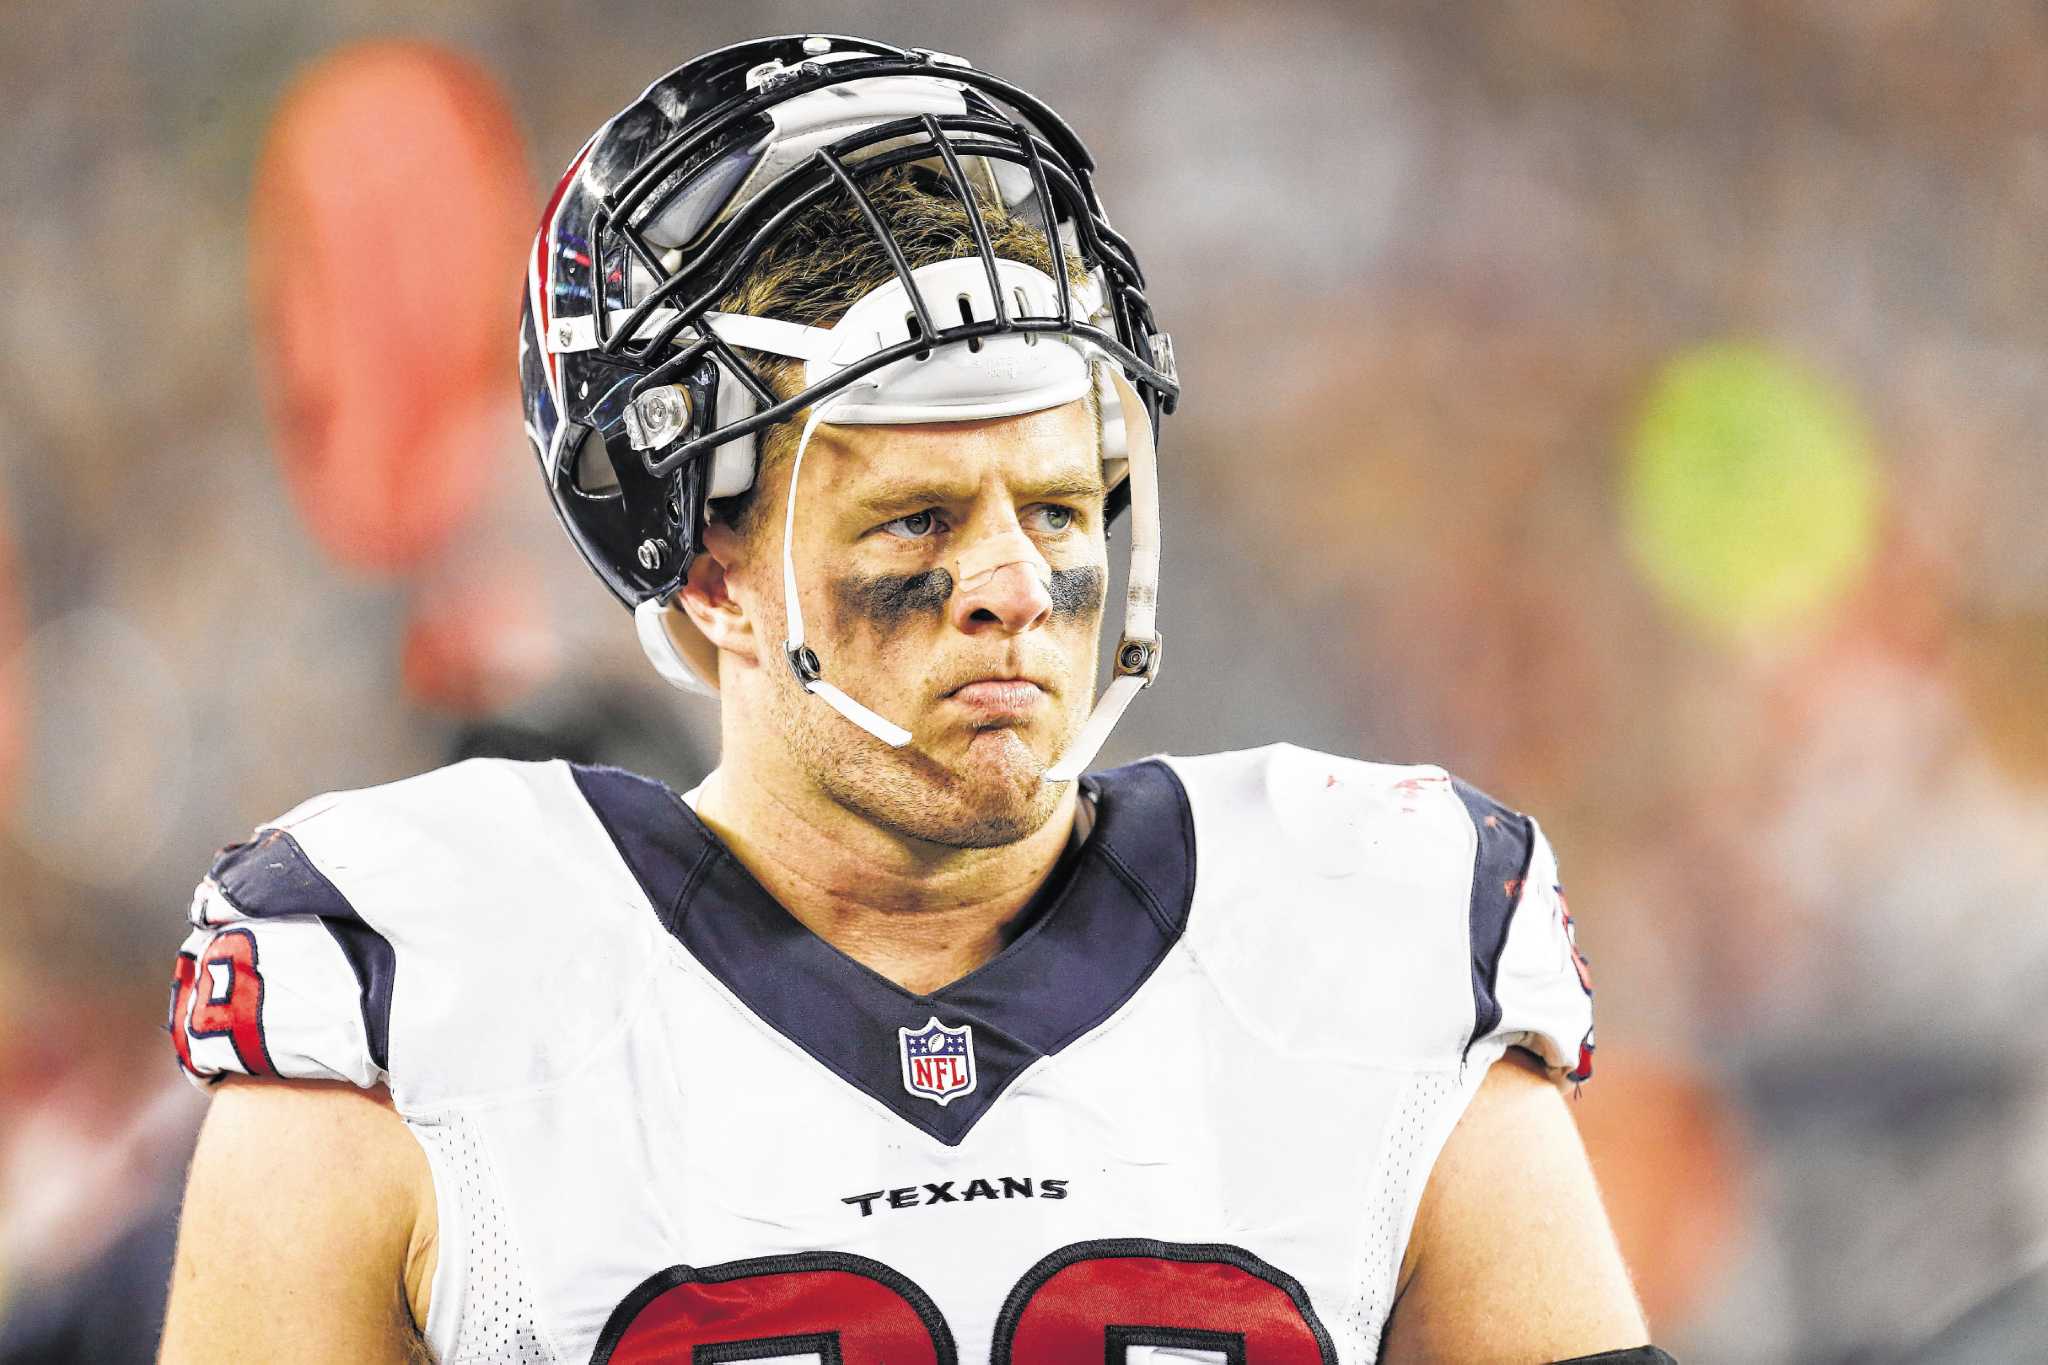 J.J. Watt brings jersey to boy who lost his in car accident